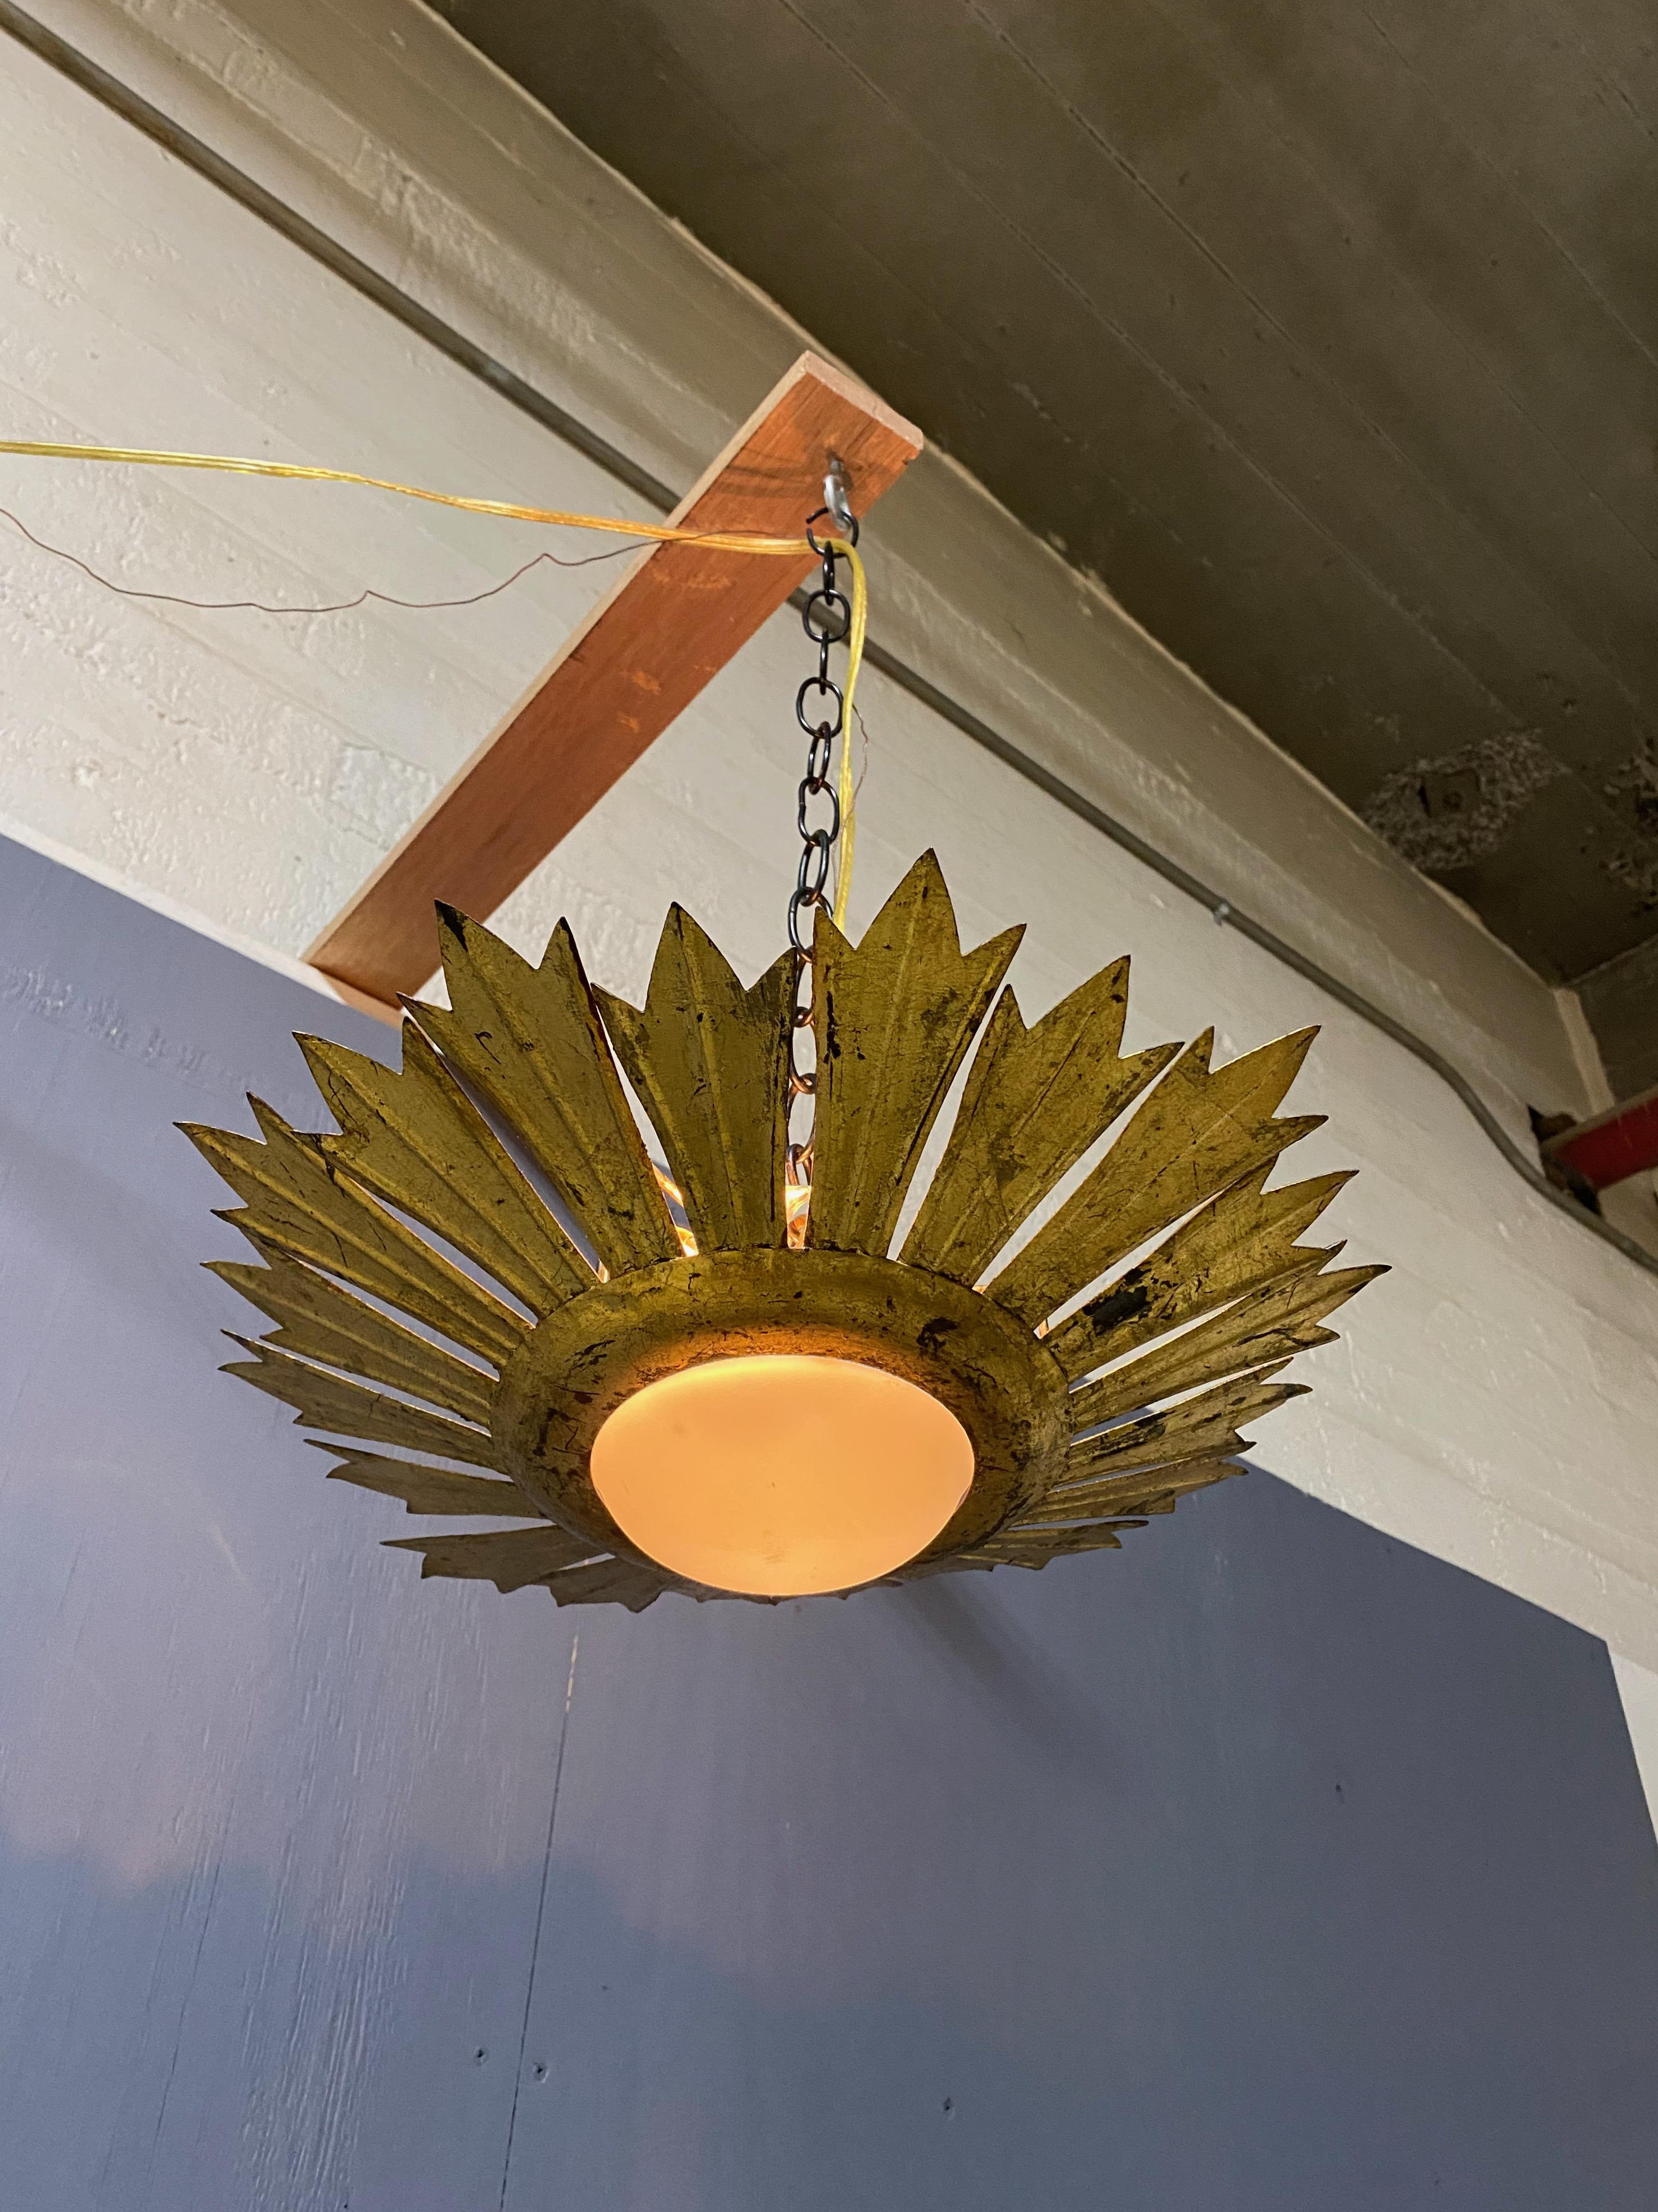 This stunning flush mount ceiling fixture has a striking modern design. The gilt metal painted rays that surround the convex white opaline globe create a remarkable effect that is truly eye-catching. While most Spanish ceiling fixtures from this